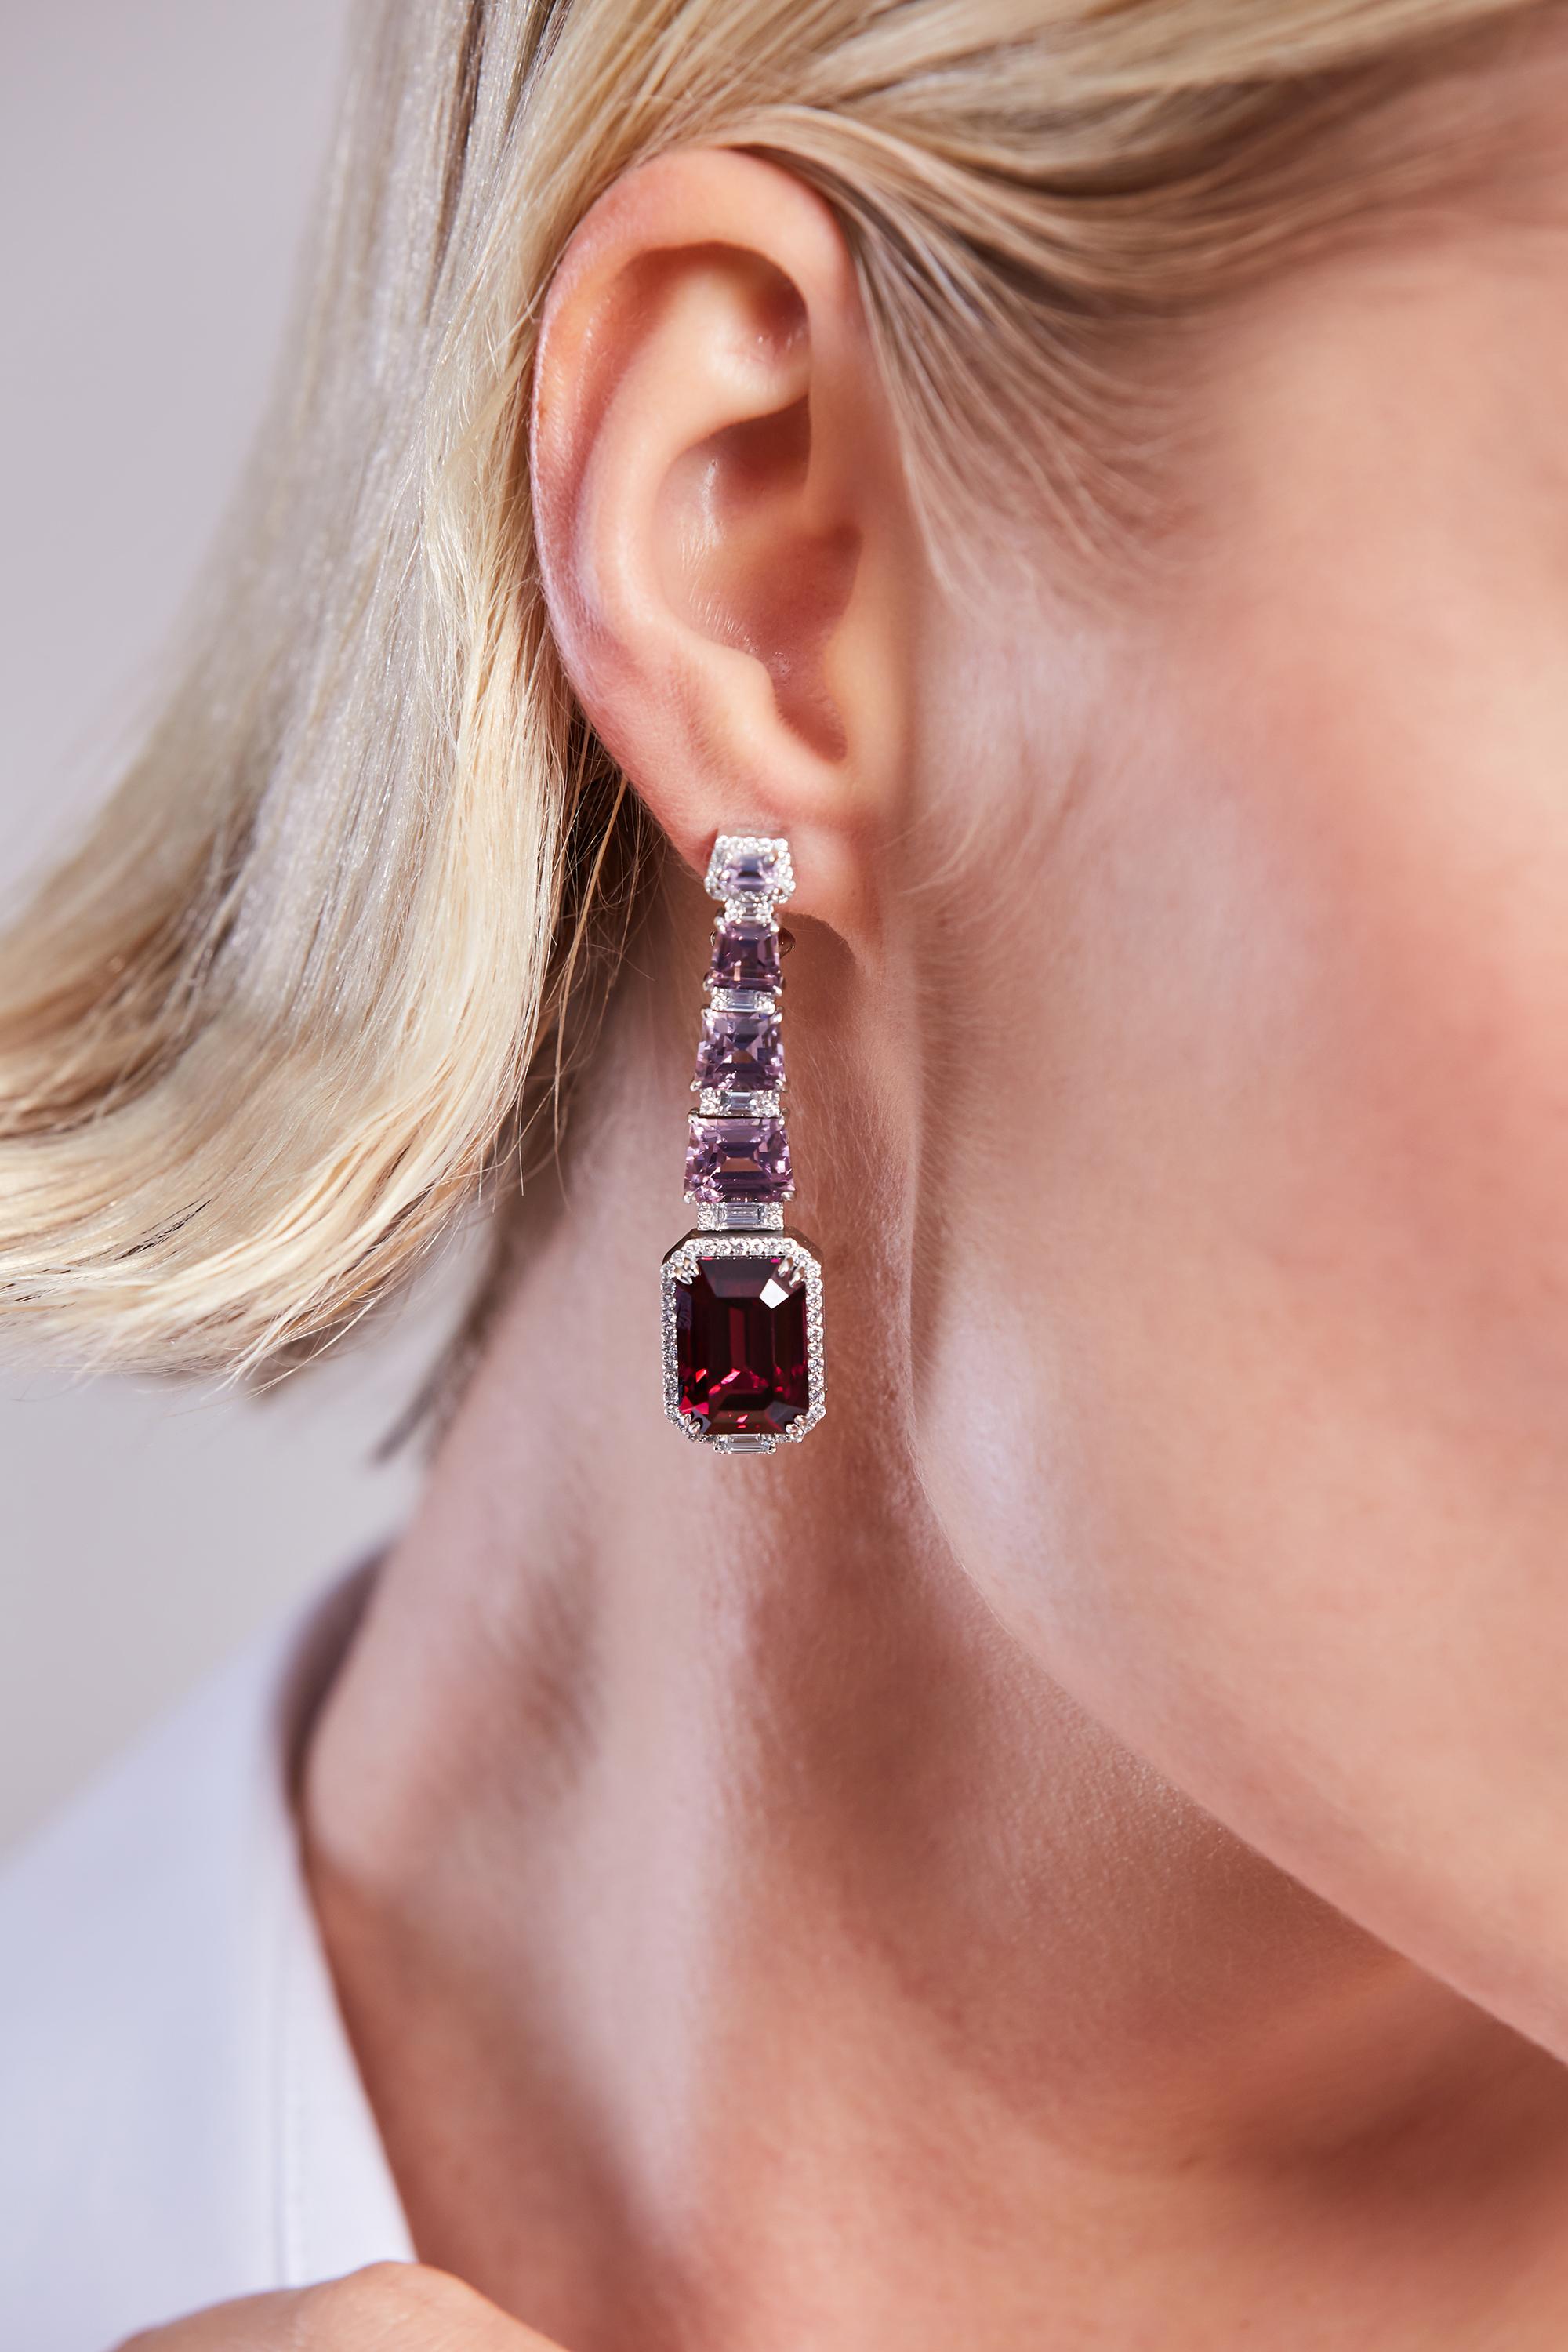 •	18k White Gold.
•	Rhodolite Garnet in emerald cut – 2 pc total carat weight 18.38.
•	Pink Spinels in fantasy cut – 8 pc total carat weight 8.02.
•	Diamonds in round & princess cut – 1.47. 
•	Product Weight – 19.61 grams.
